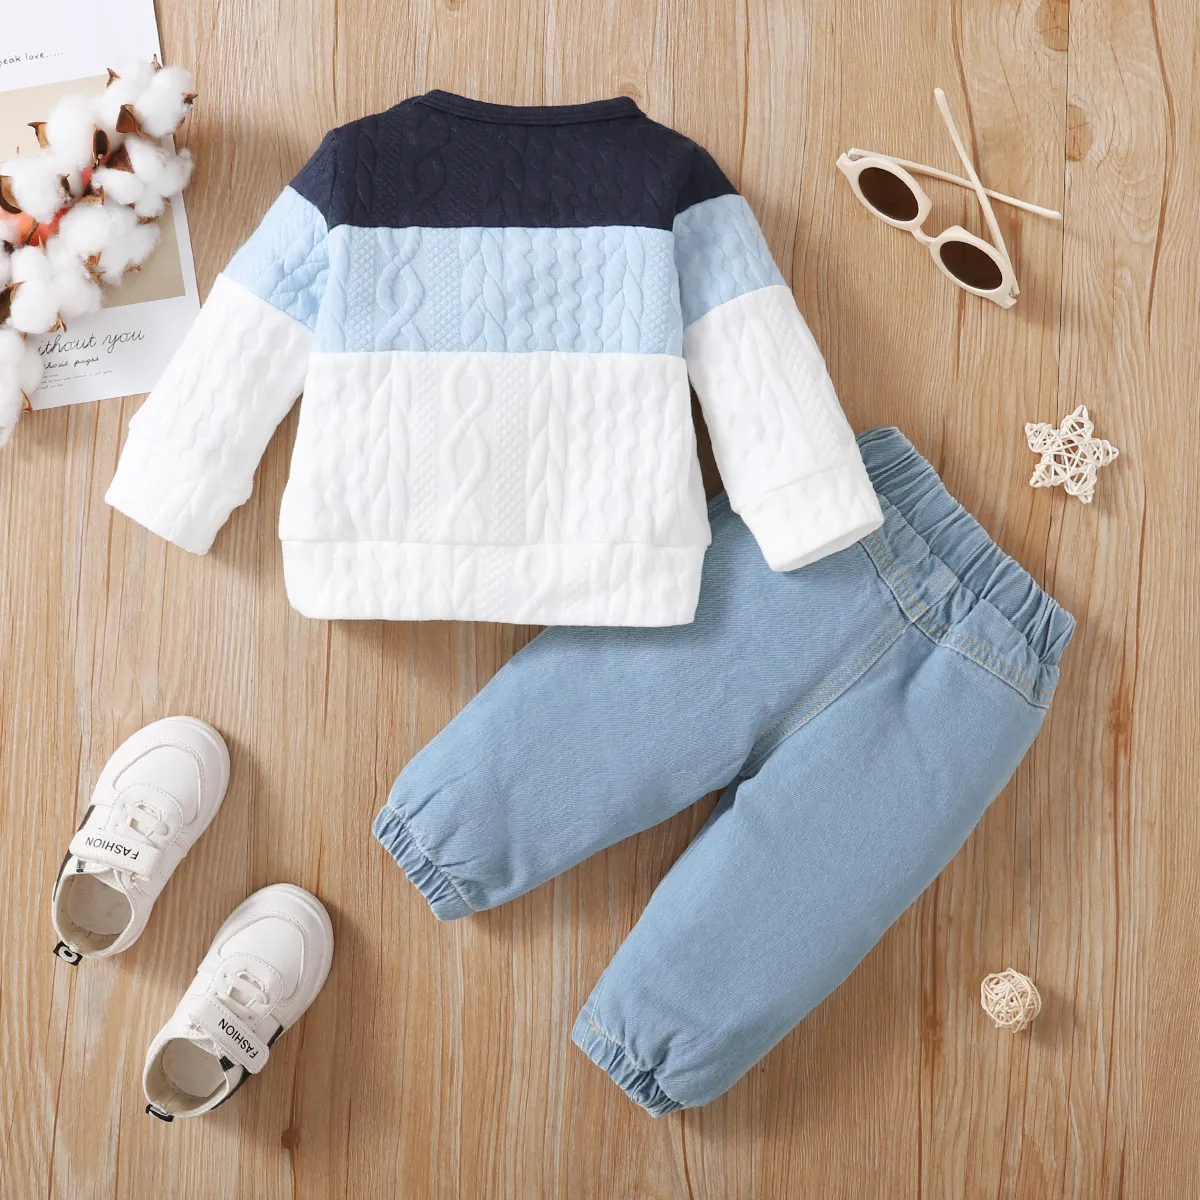 2pcs Baby Boy 95% Cotton Ripped Jeans and Textured Colorblock Long-sleeve Sweatshirt Set Blue big image 1